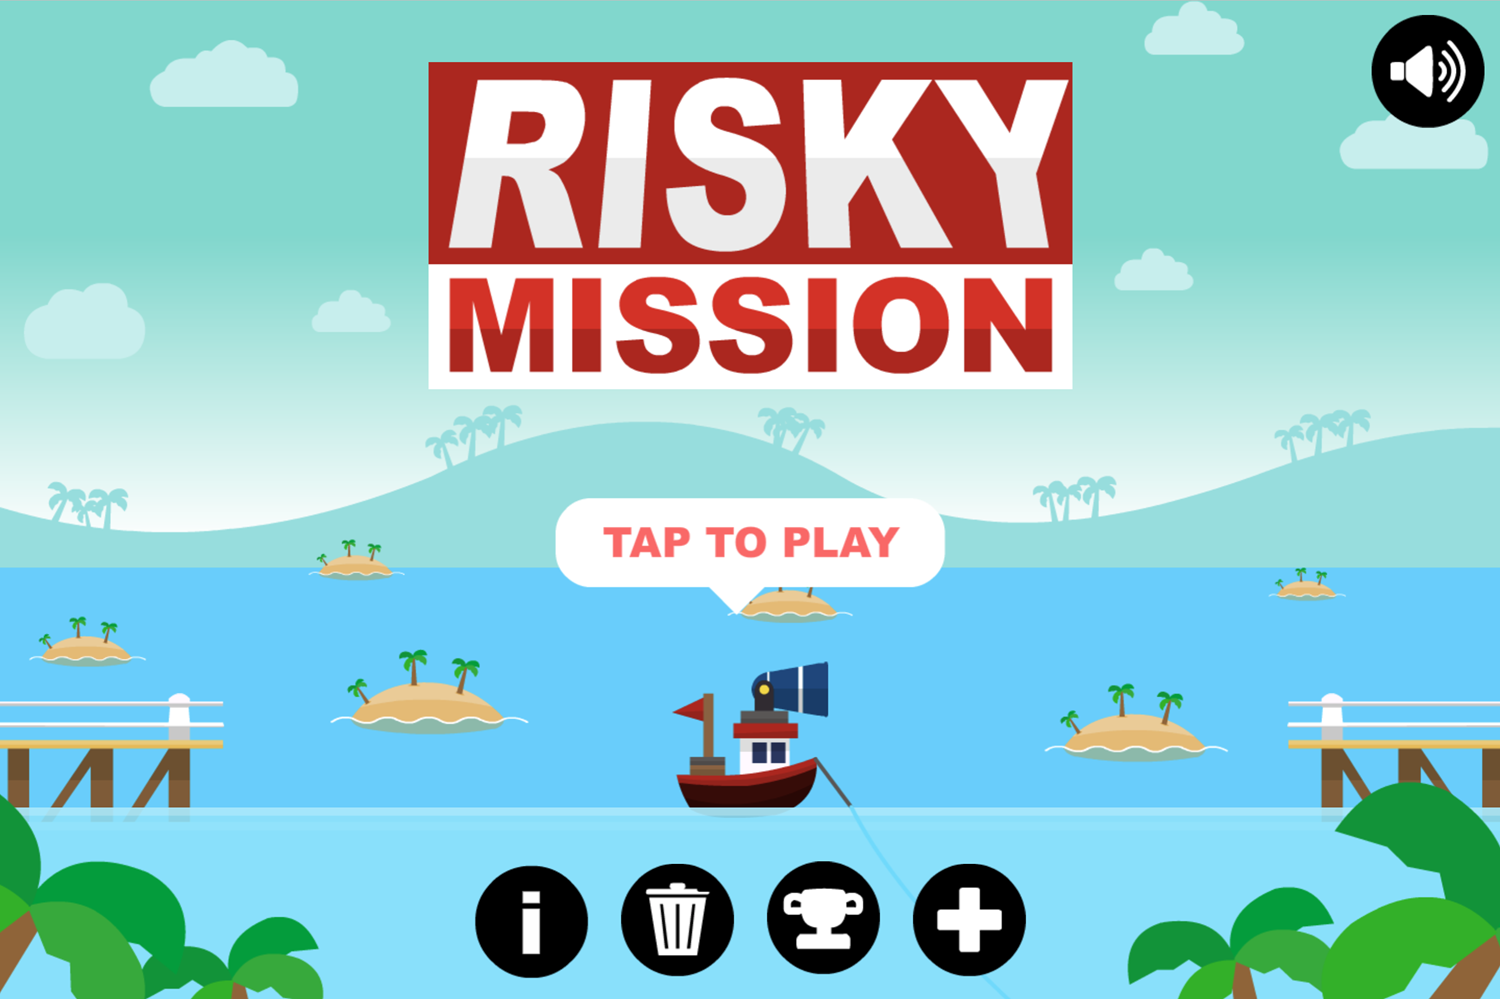 Risky Mission Game Welcome Screen Screenshot.